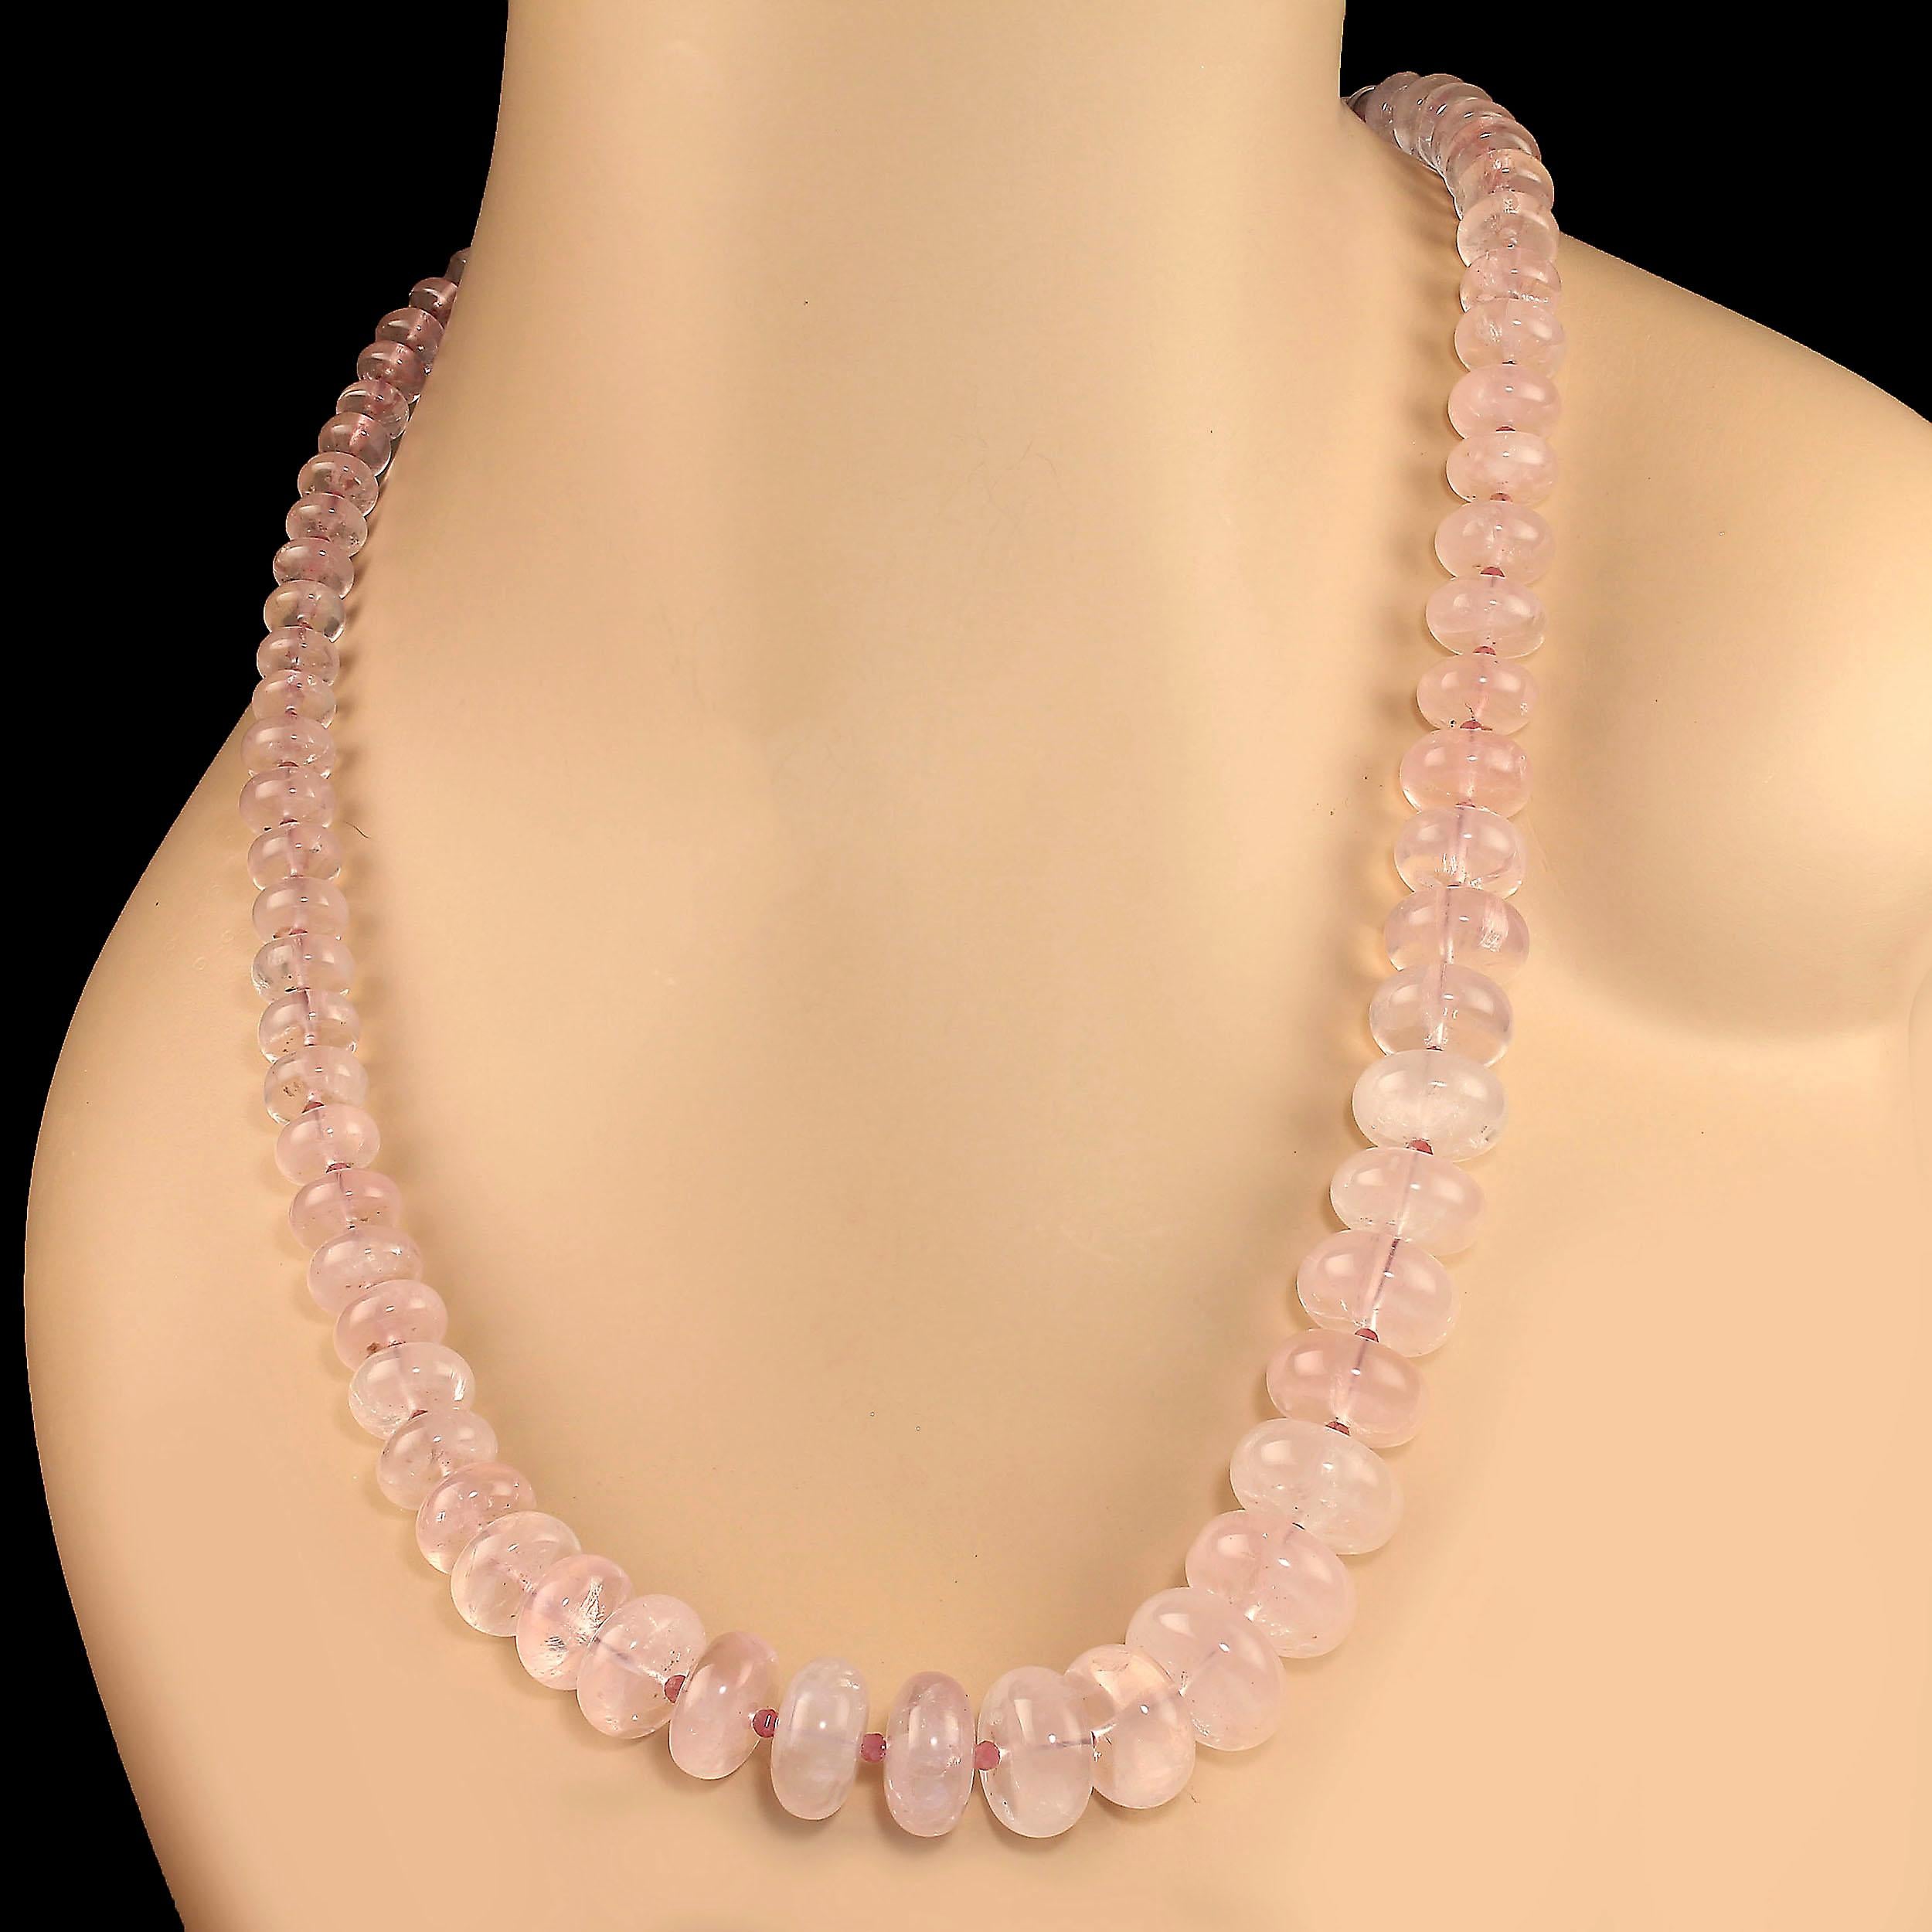 Artisan AJD 24 Inch Graduated Rose Quartz Necklace Perfect Valentine's Day Gift! For Sale